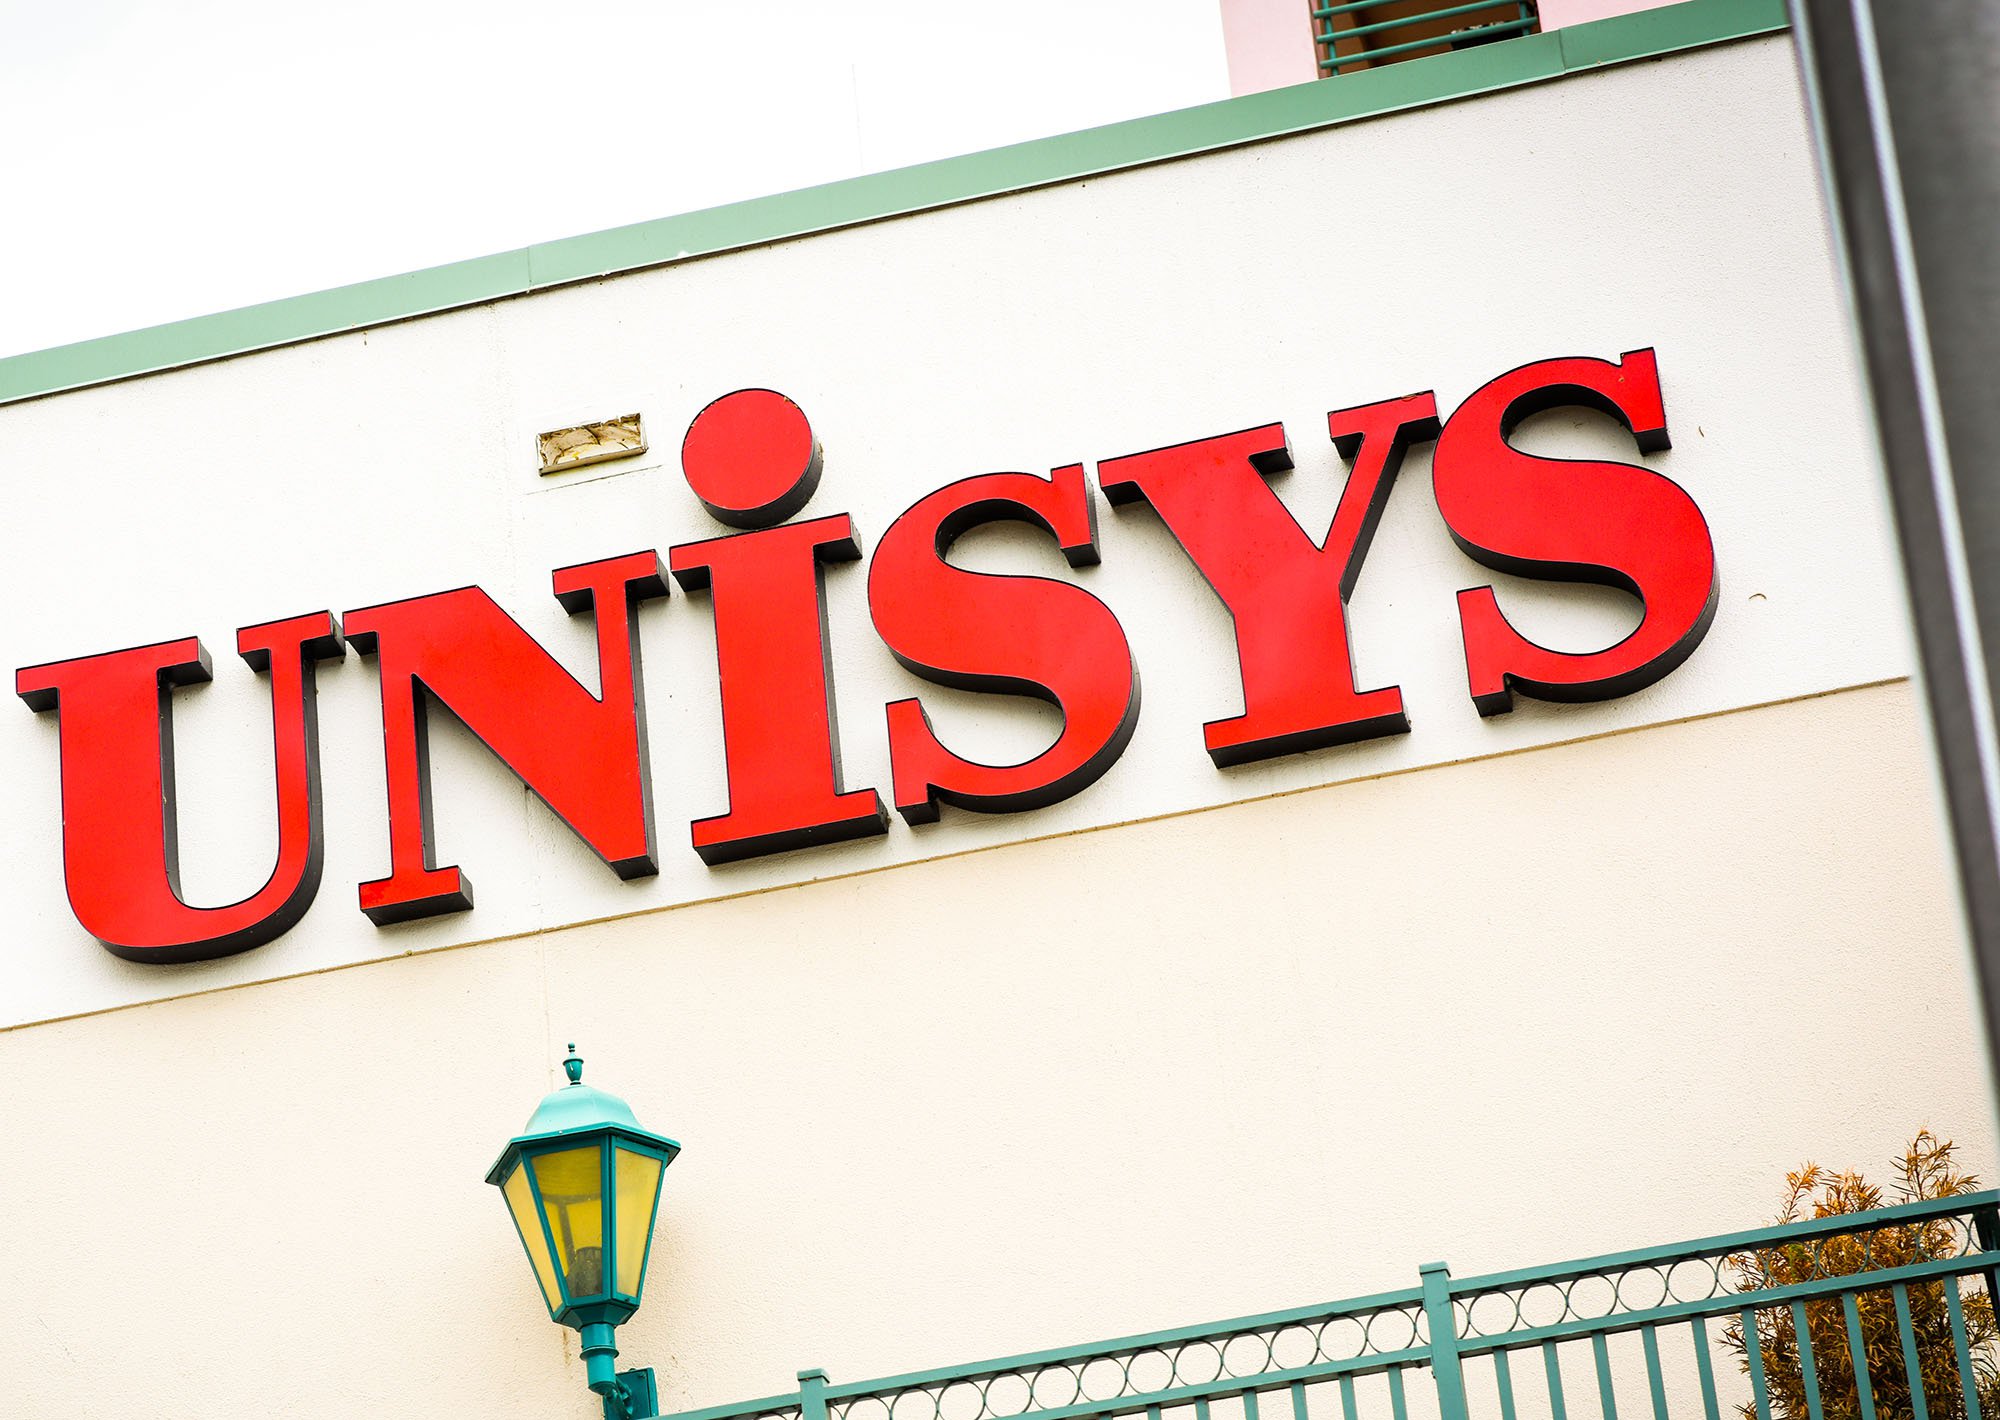 Unisys Student Technical Job Opportunity | Apply here!